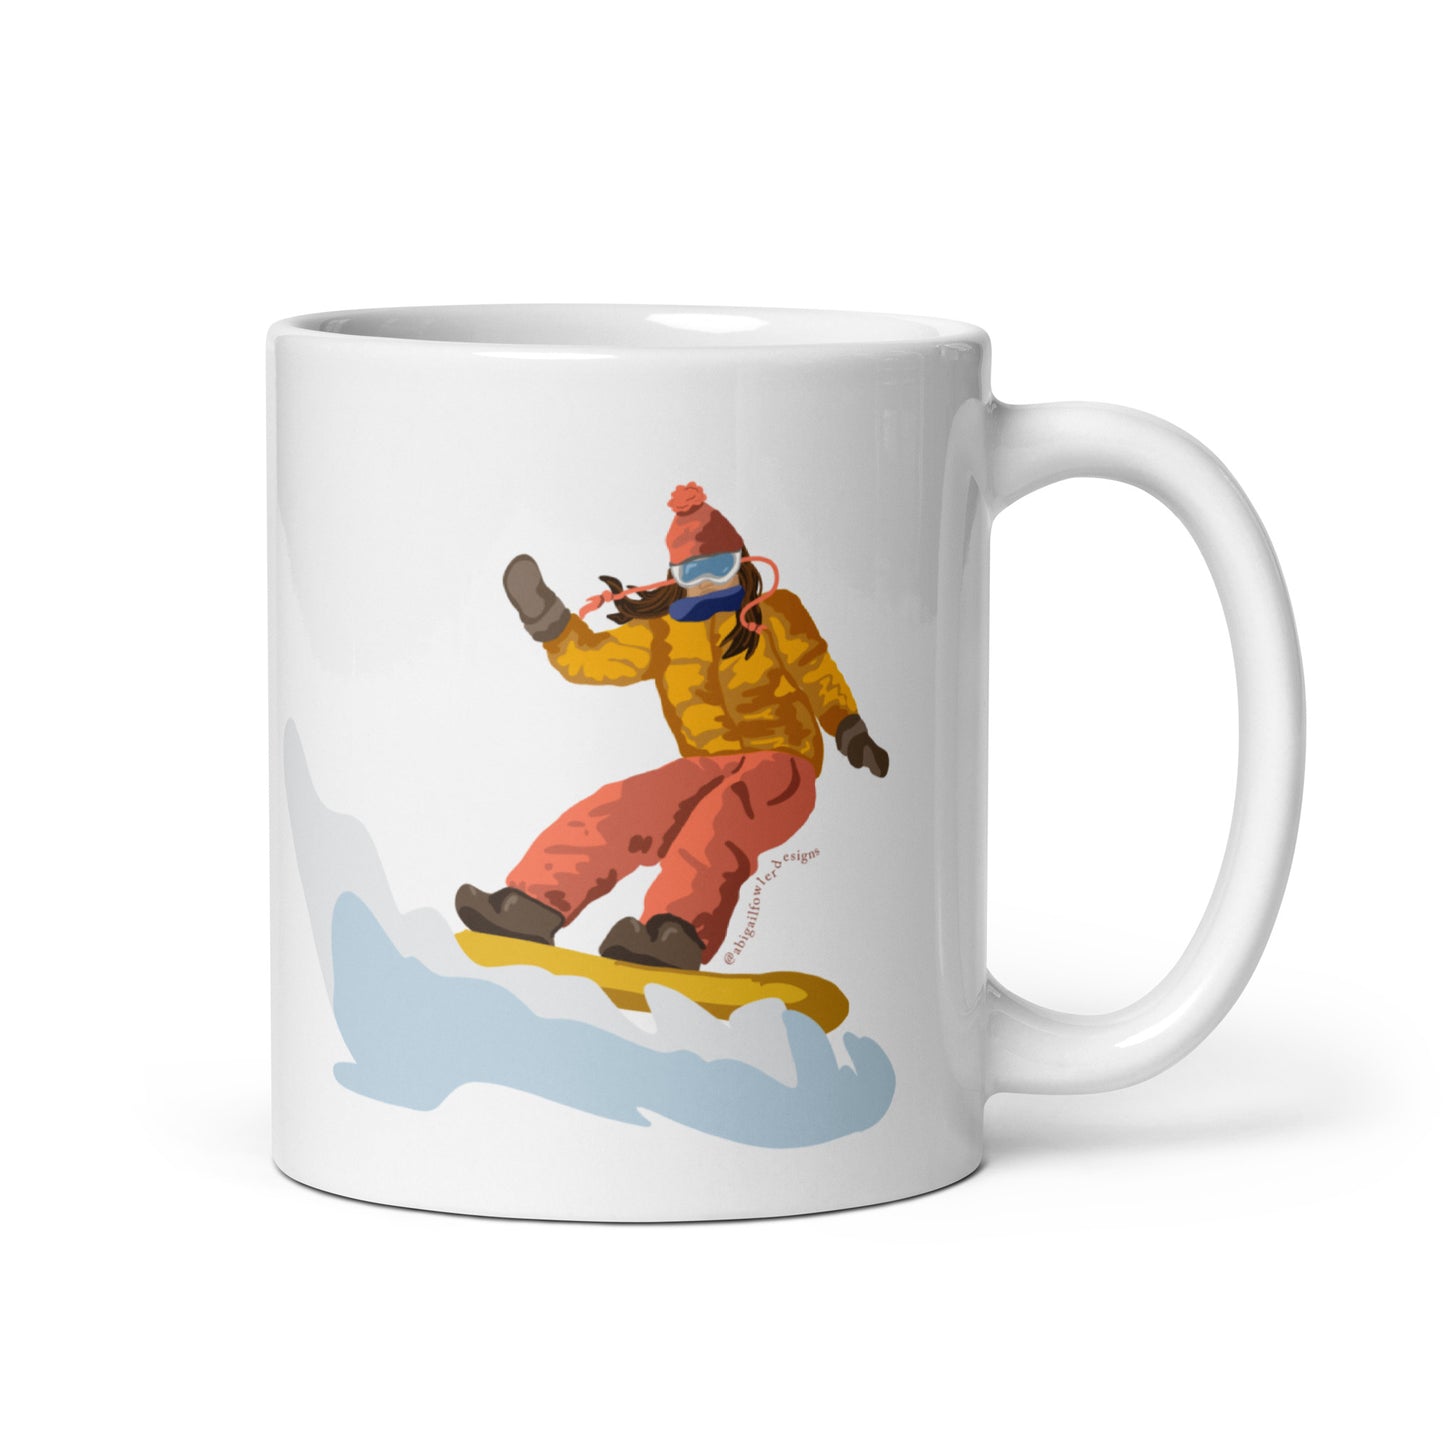 Tan and Brunette Icy Snowboarder White glossy mug